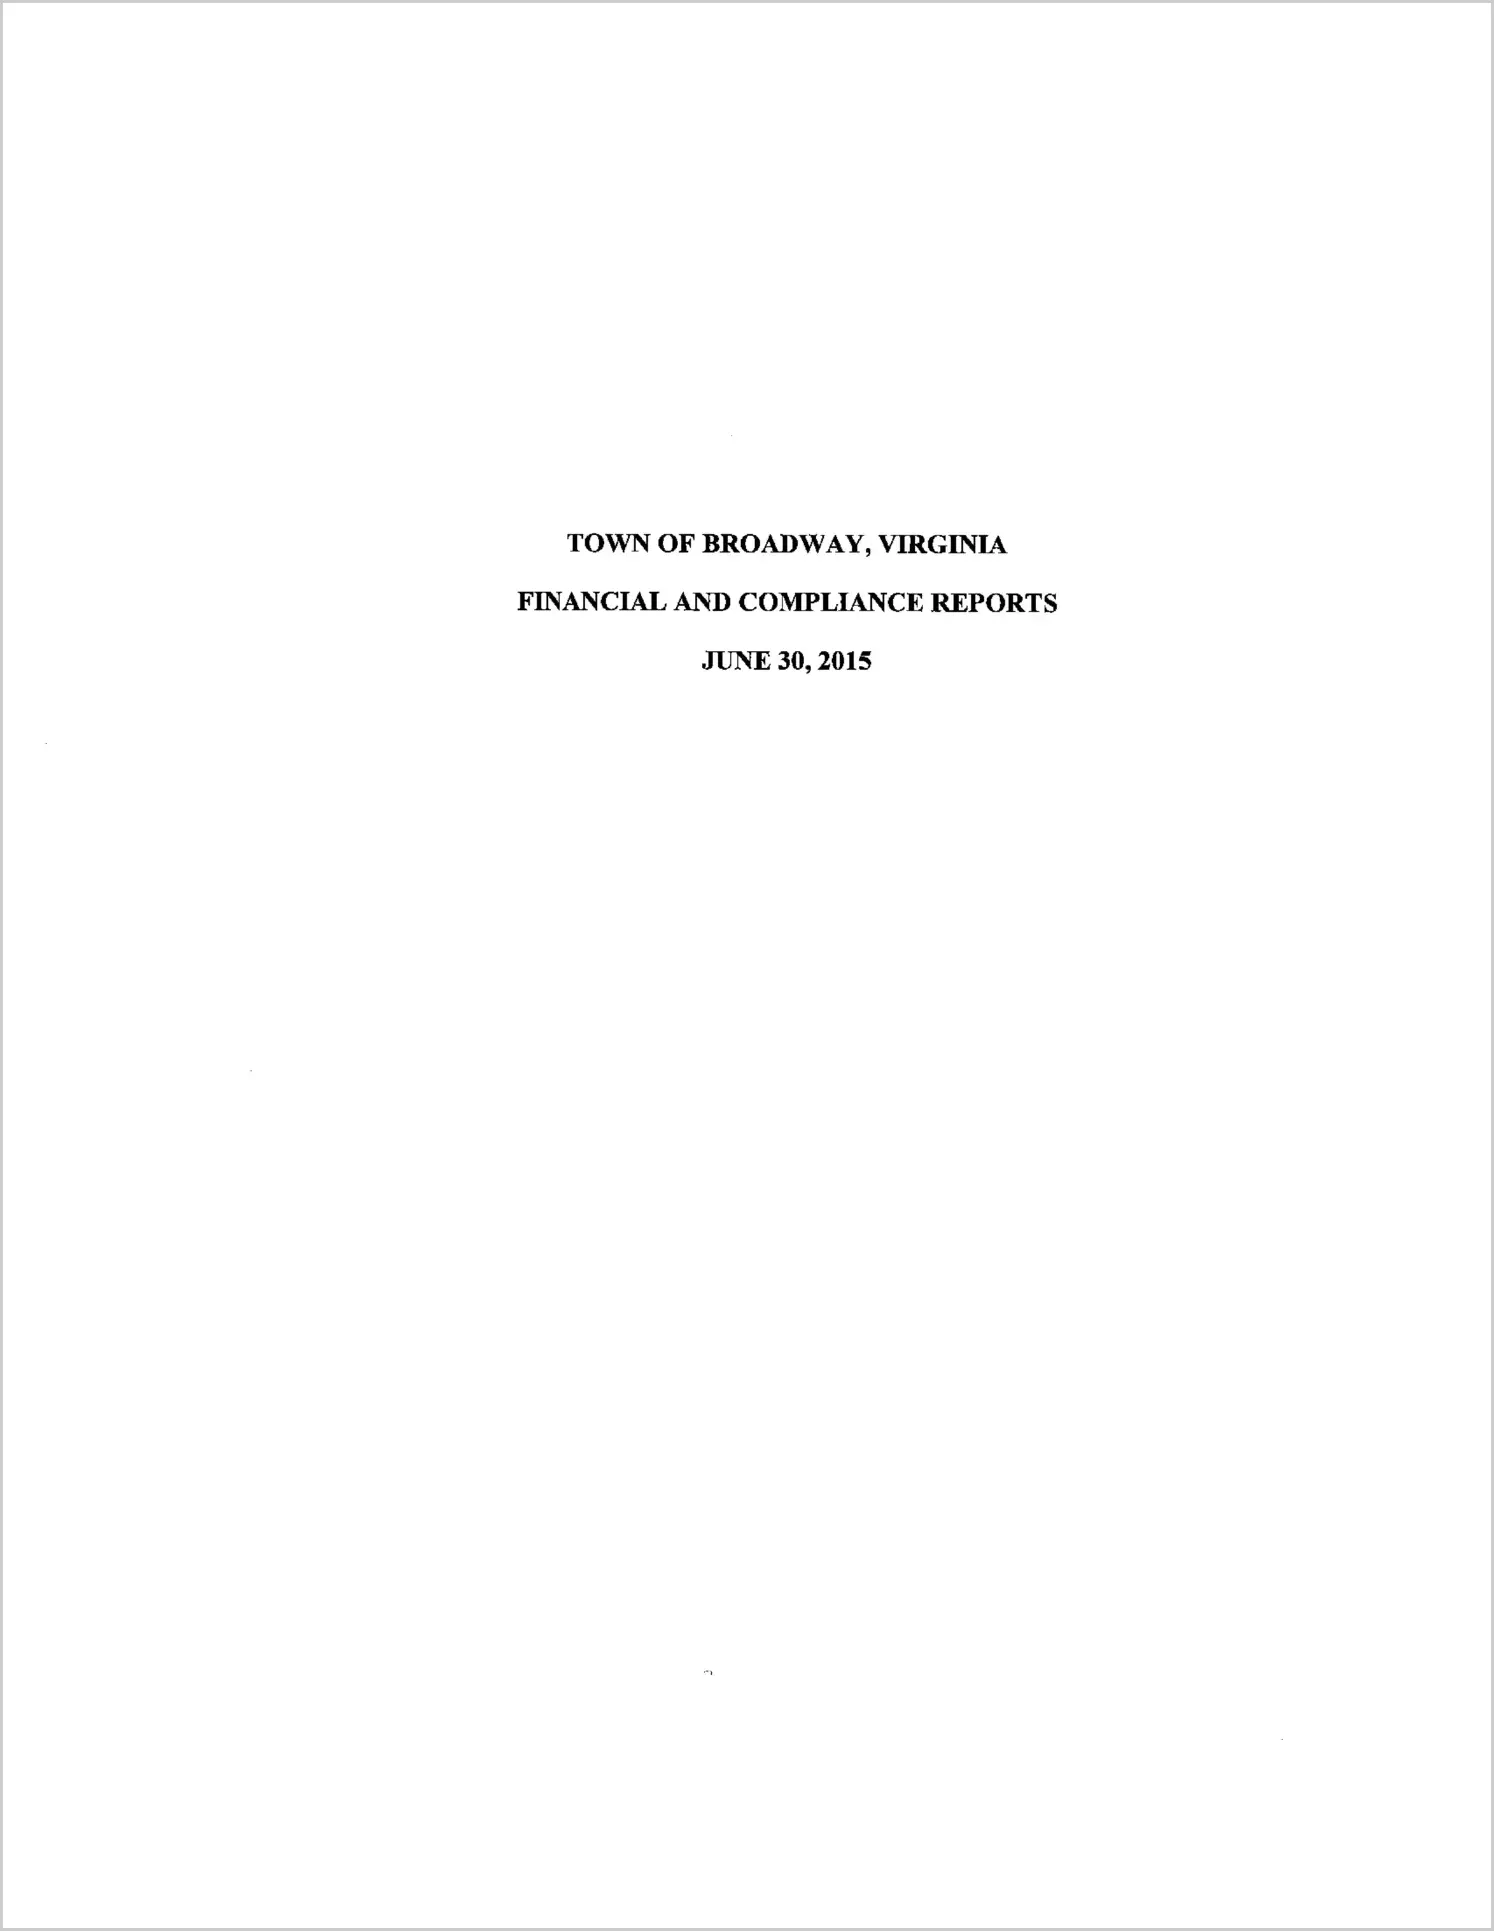 2015 Annual Financial Report for Town of Broadway